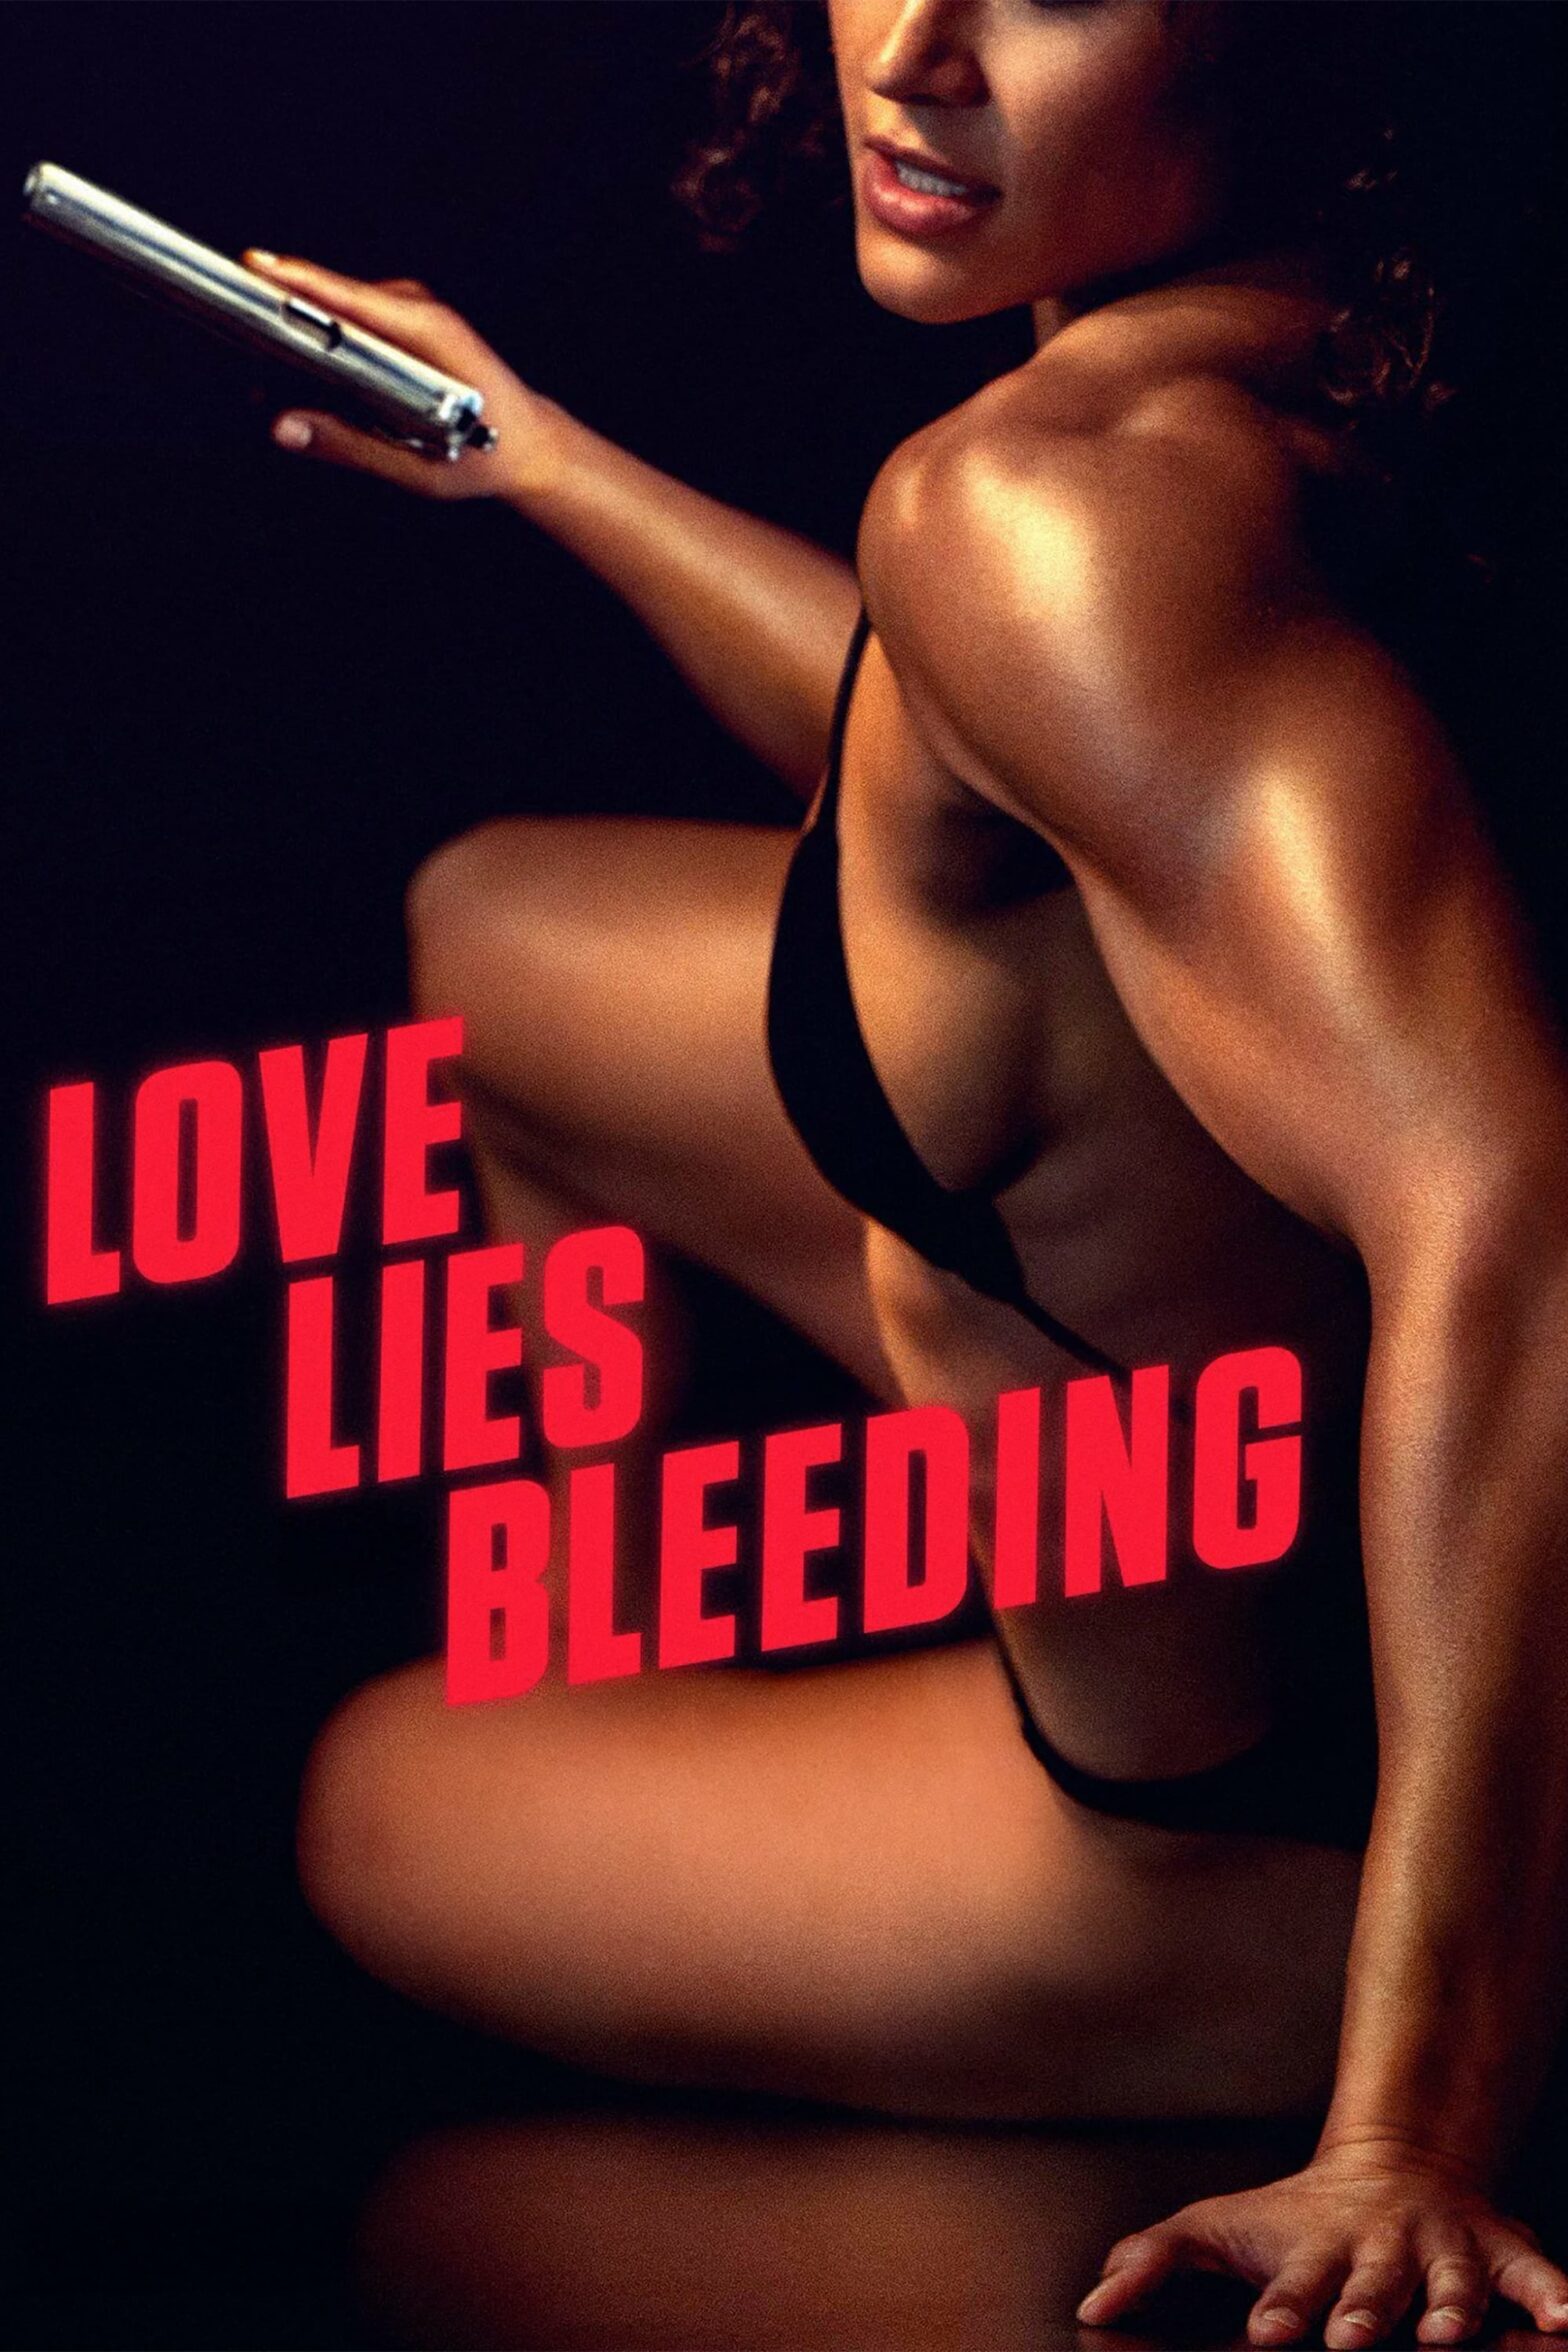 Poster for the movie "Love Lies Bleeding"